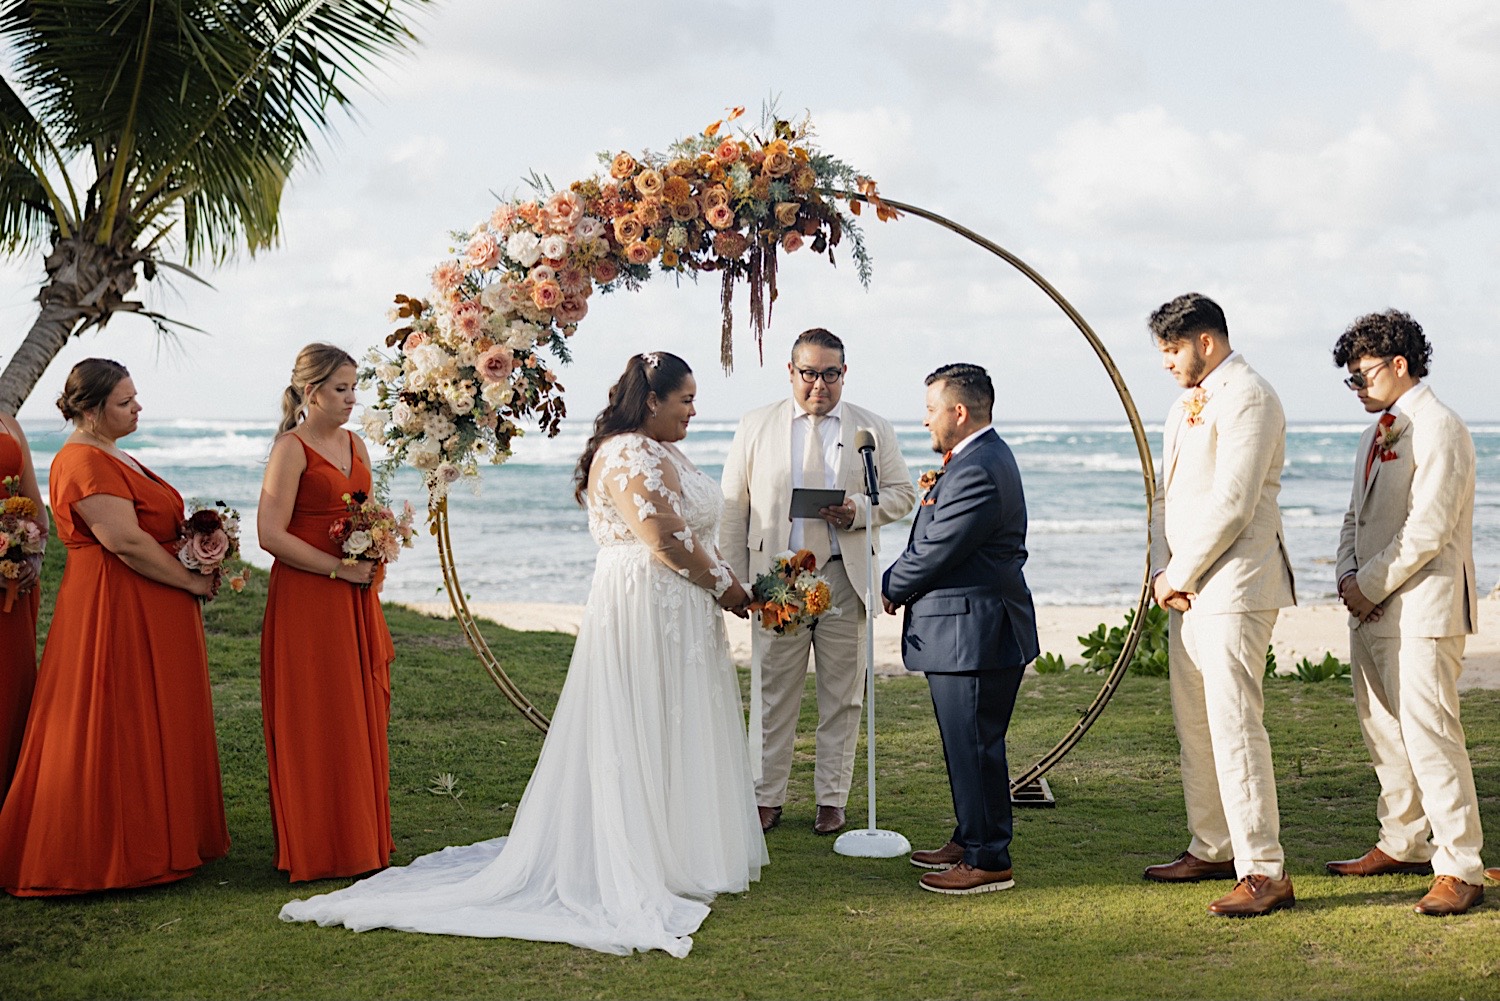 A wedding ceremony takes place in front of the ocean at a villa on Oahu